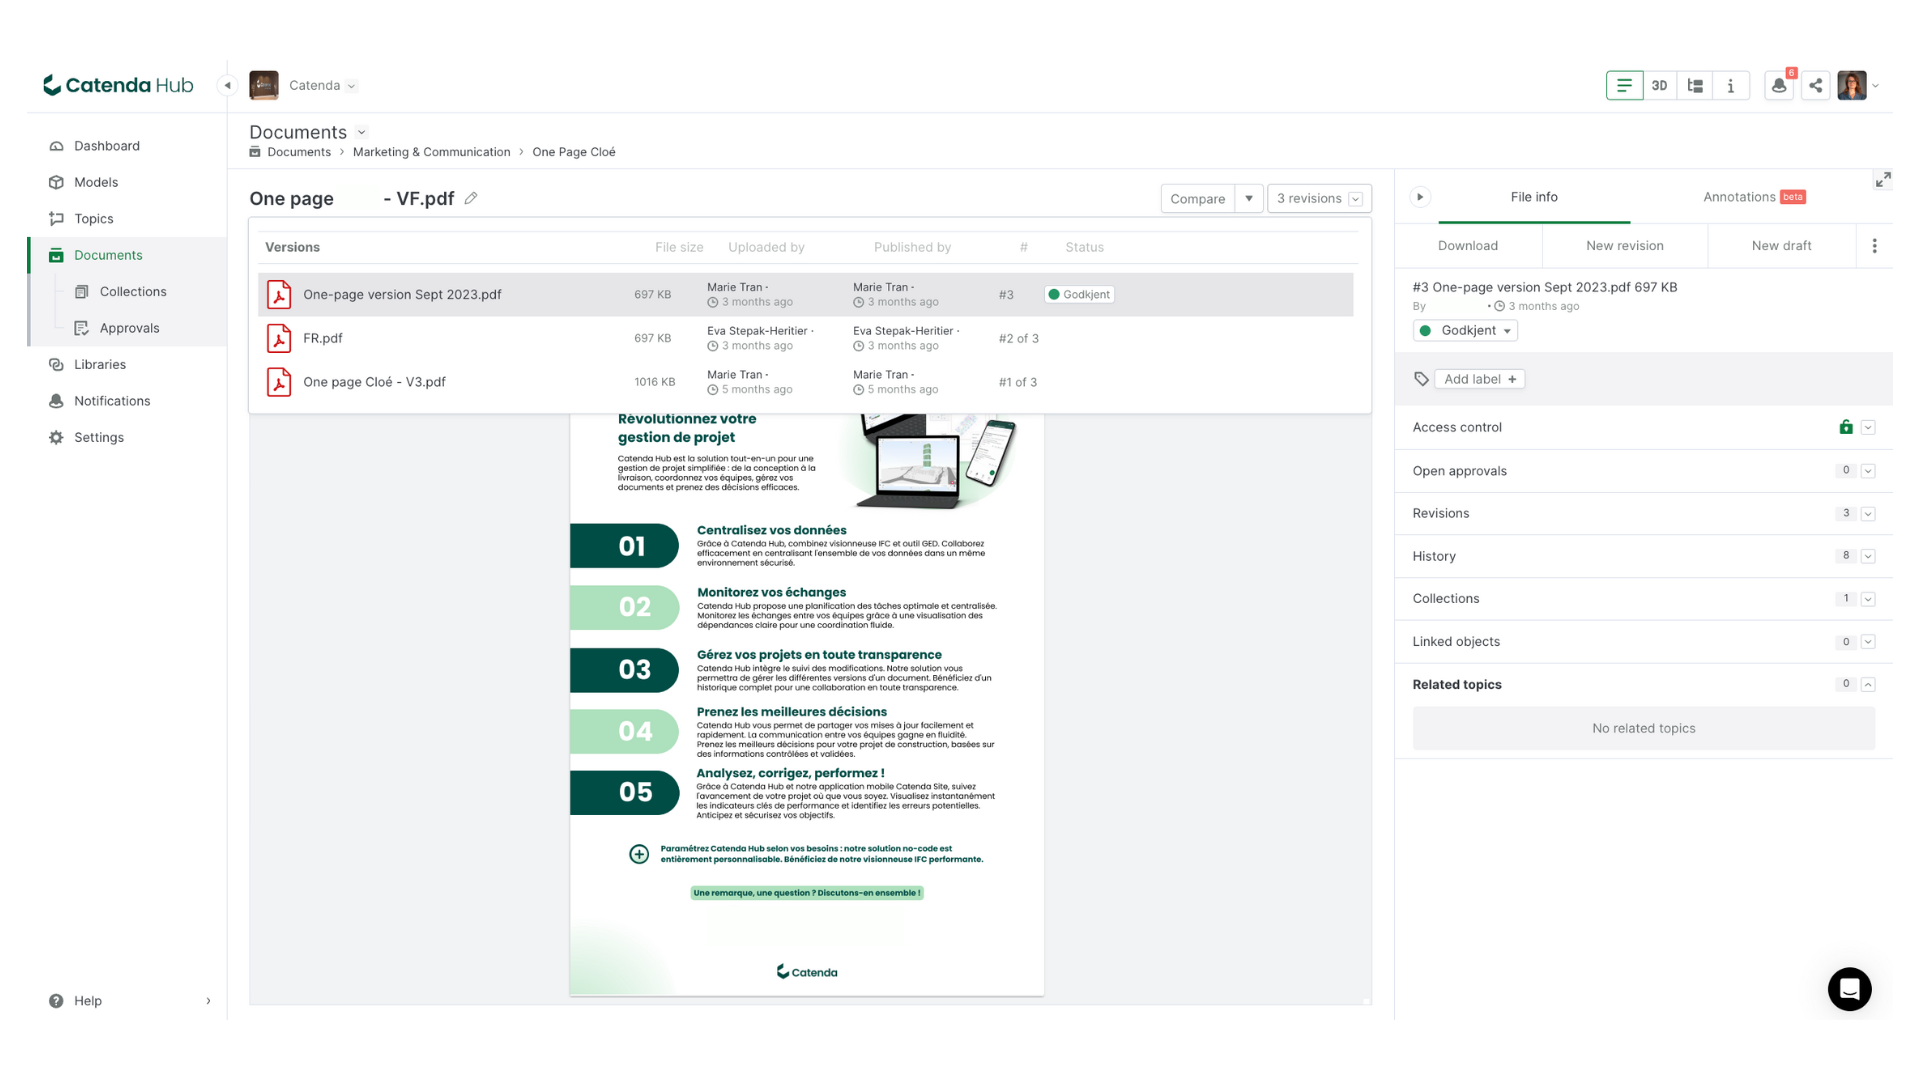 Interface of Catenda Hub collaboration platform - The document comparison feature to showcase the changes between old and updated versions